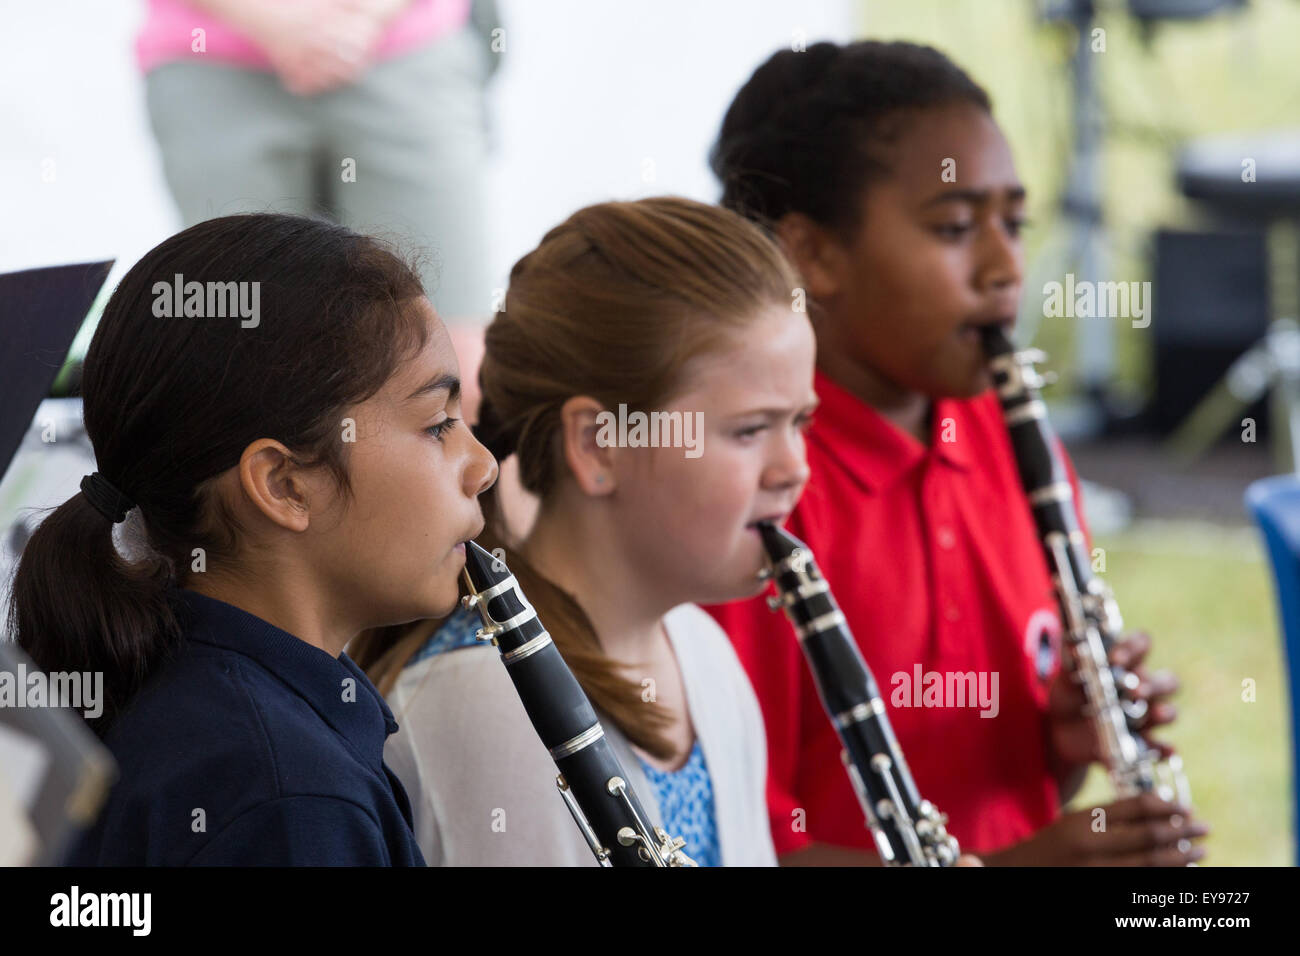 Three female clarinet players of various ethnicities (black African, Asian, white) play in  a youth music group / orchestra / band Stock Photo